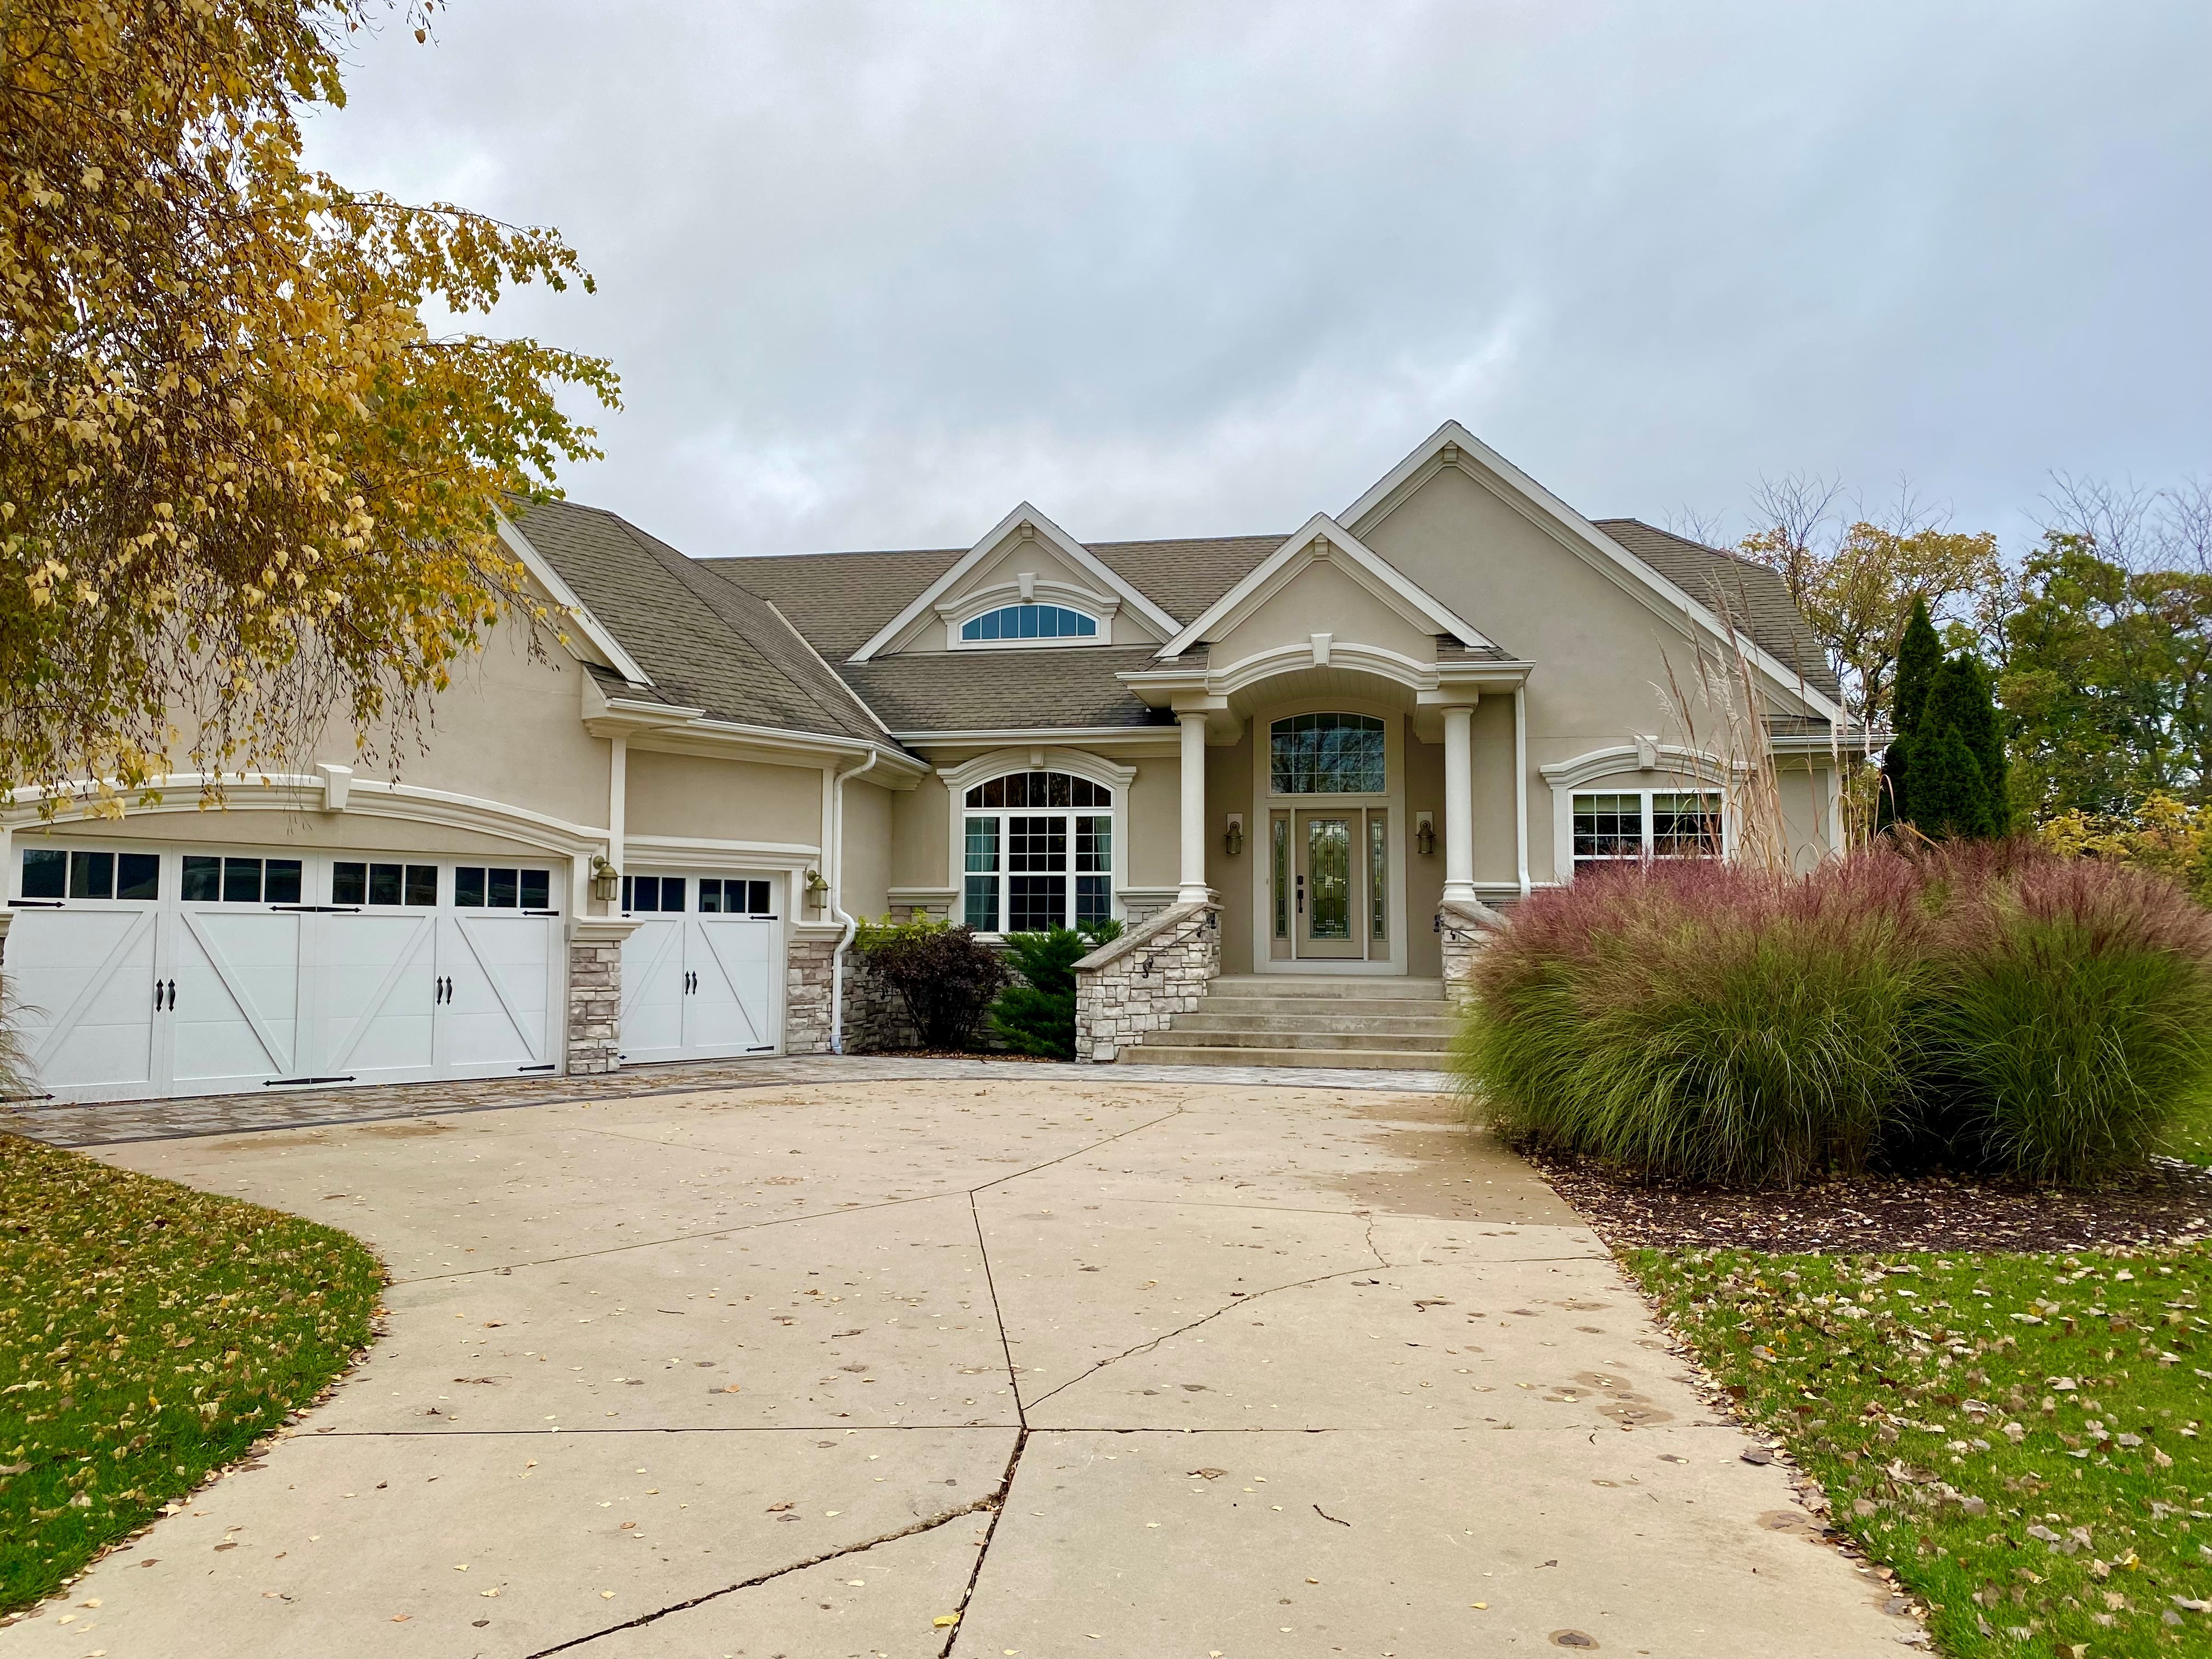 SOLD! 4BR, 3BA Ranch Home on Palmer Course in Geneva National | 1055 Geneva National Ave N, Lake Geneva WI